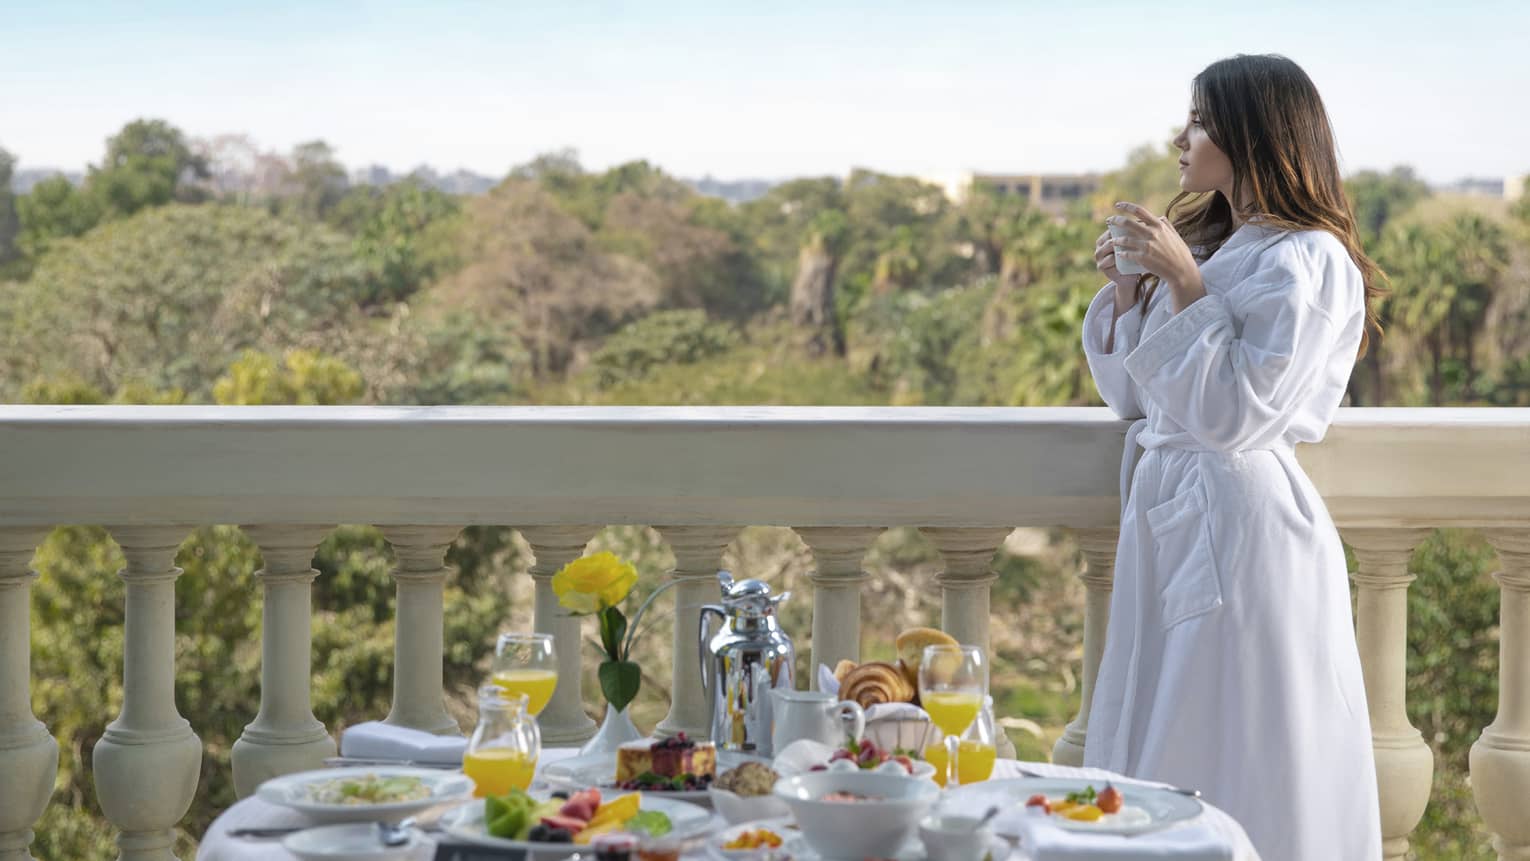 A woman in a white robe sips coffee while looking over a balcony, a variety of food on a table in front of her